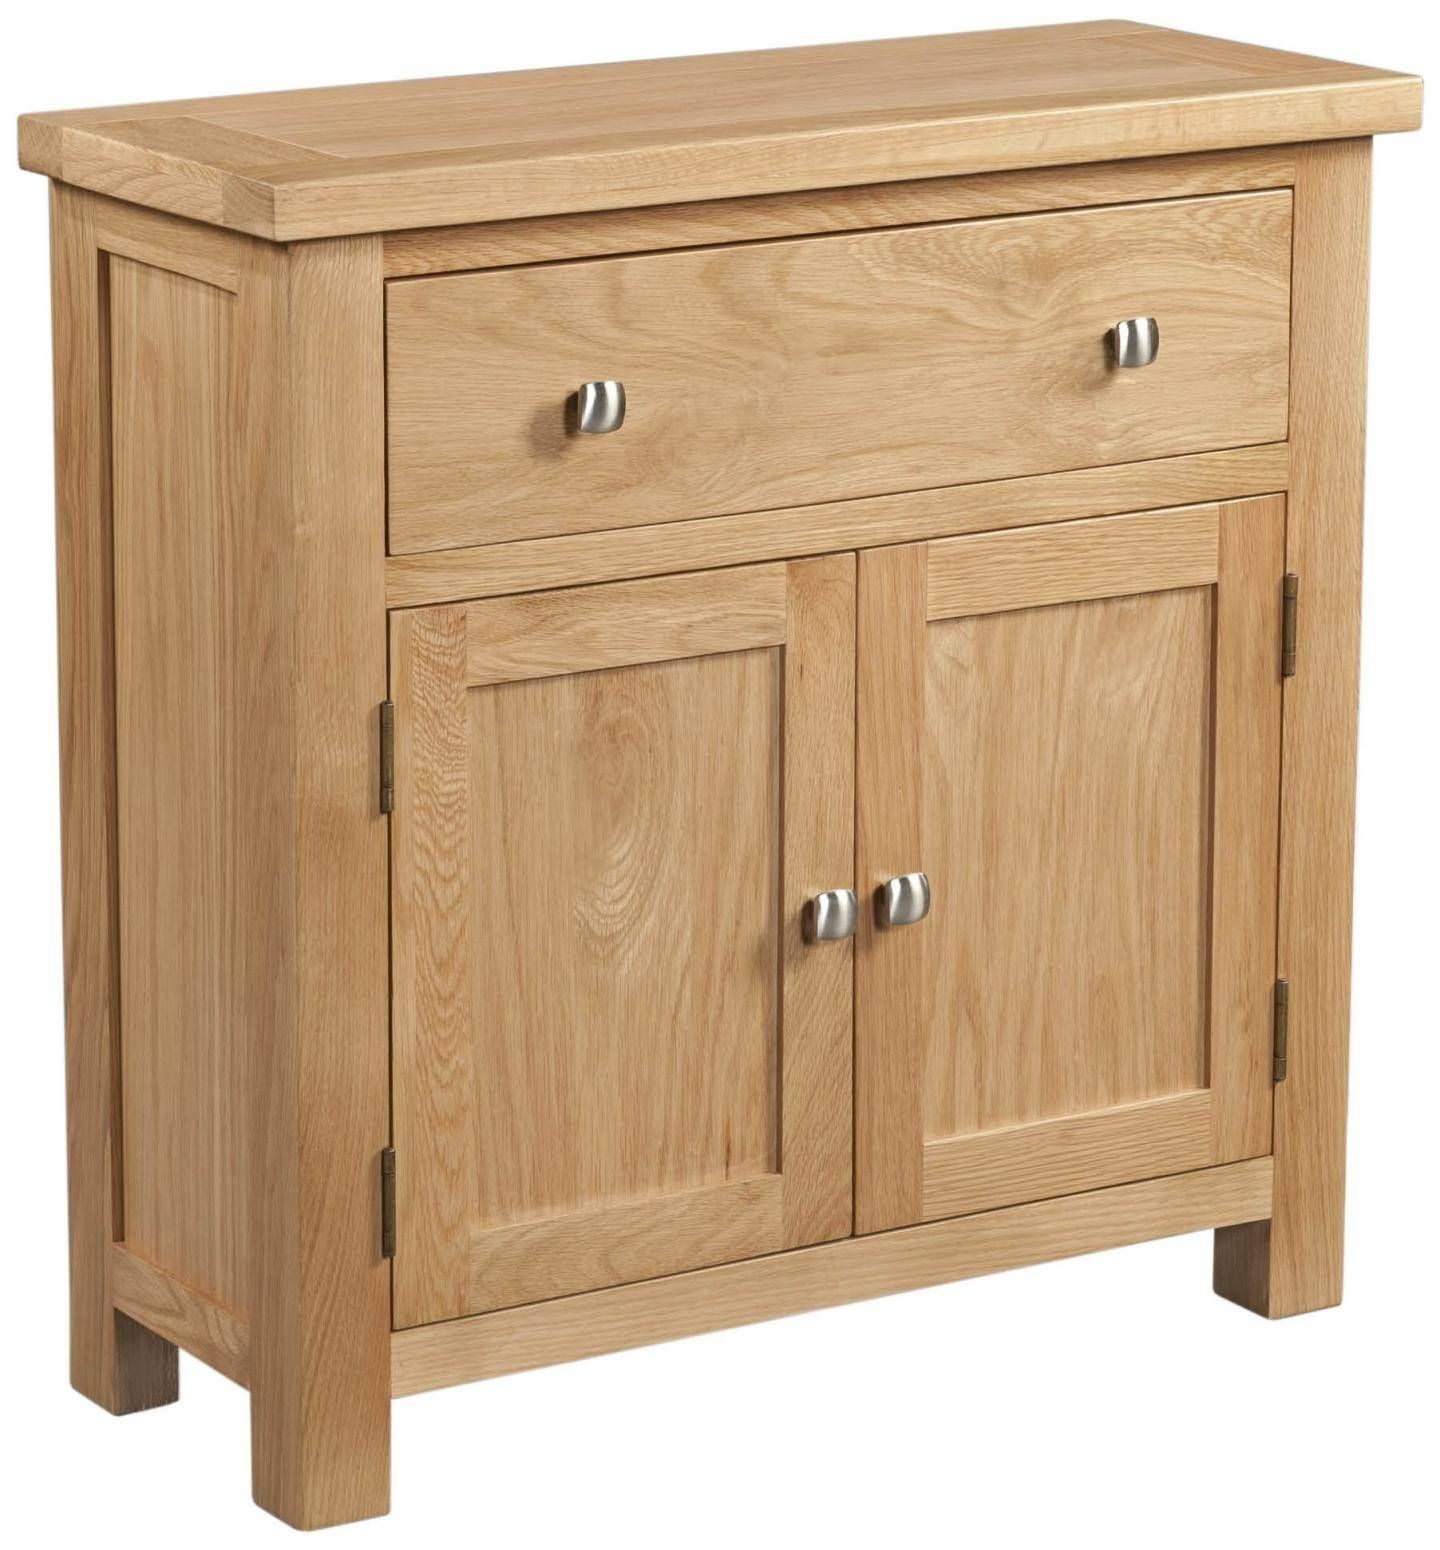 Lovely Pine & Oak Sideboards | Willoby's Furniture Swindon, Wiltshire Intended For Small Sideboards With Drawers (View 13 of 30)